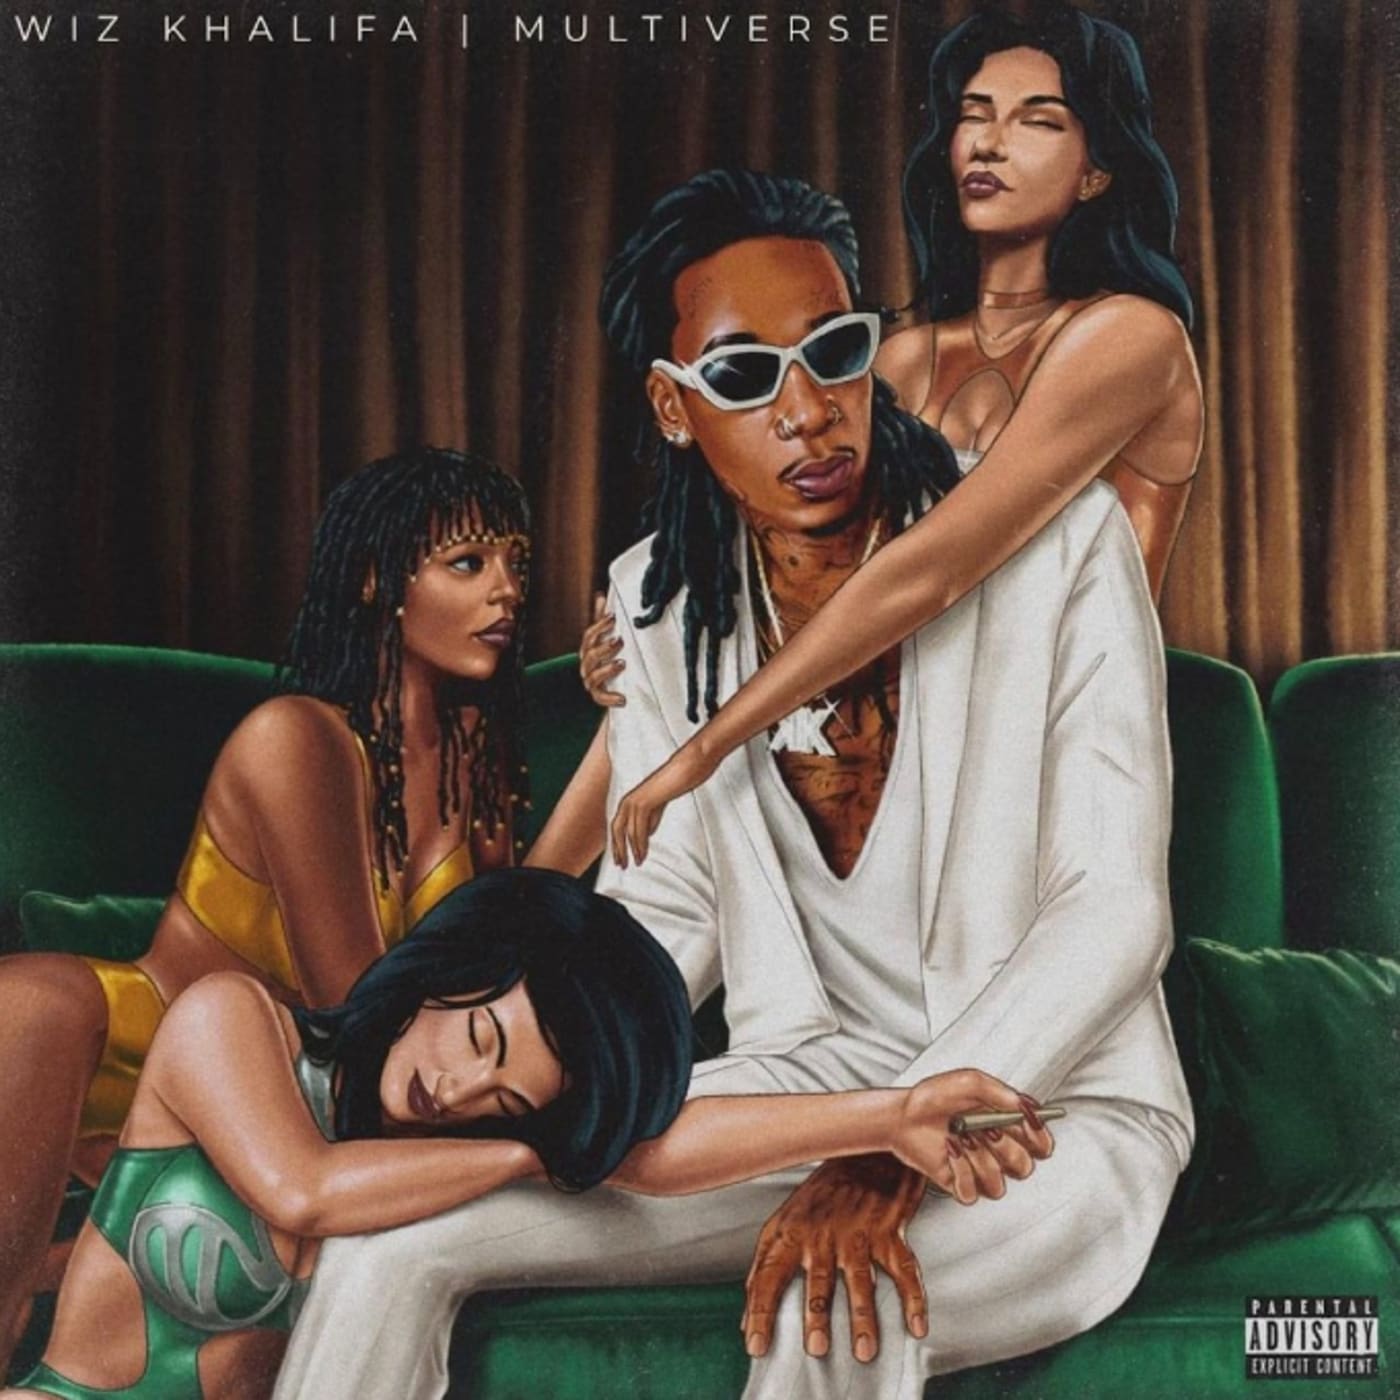 Wiz Khalifa is seen in cover art for his new album